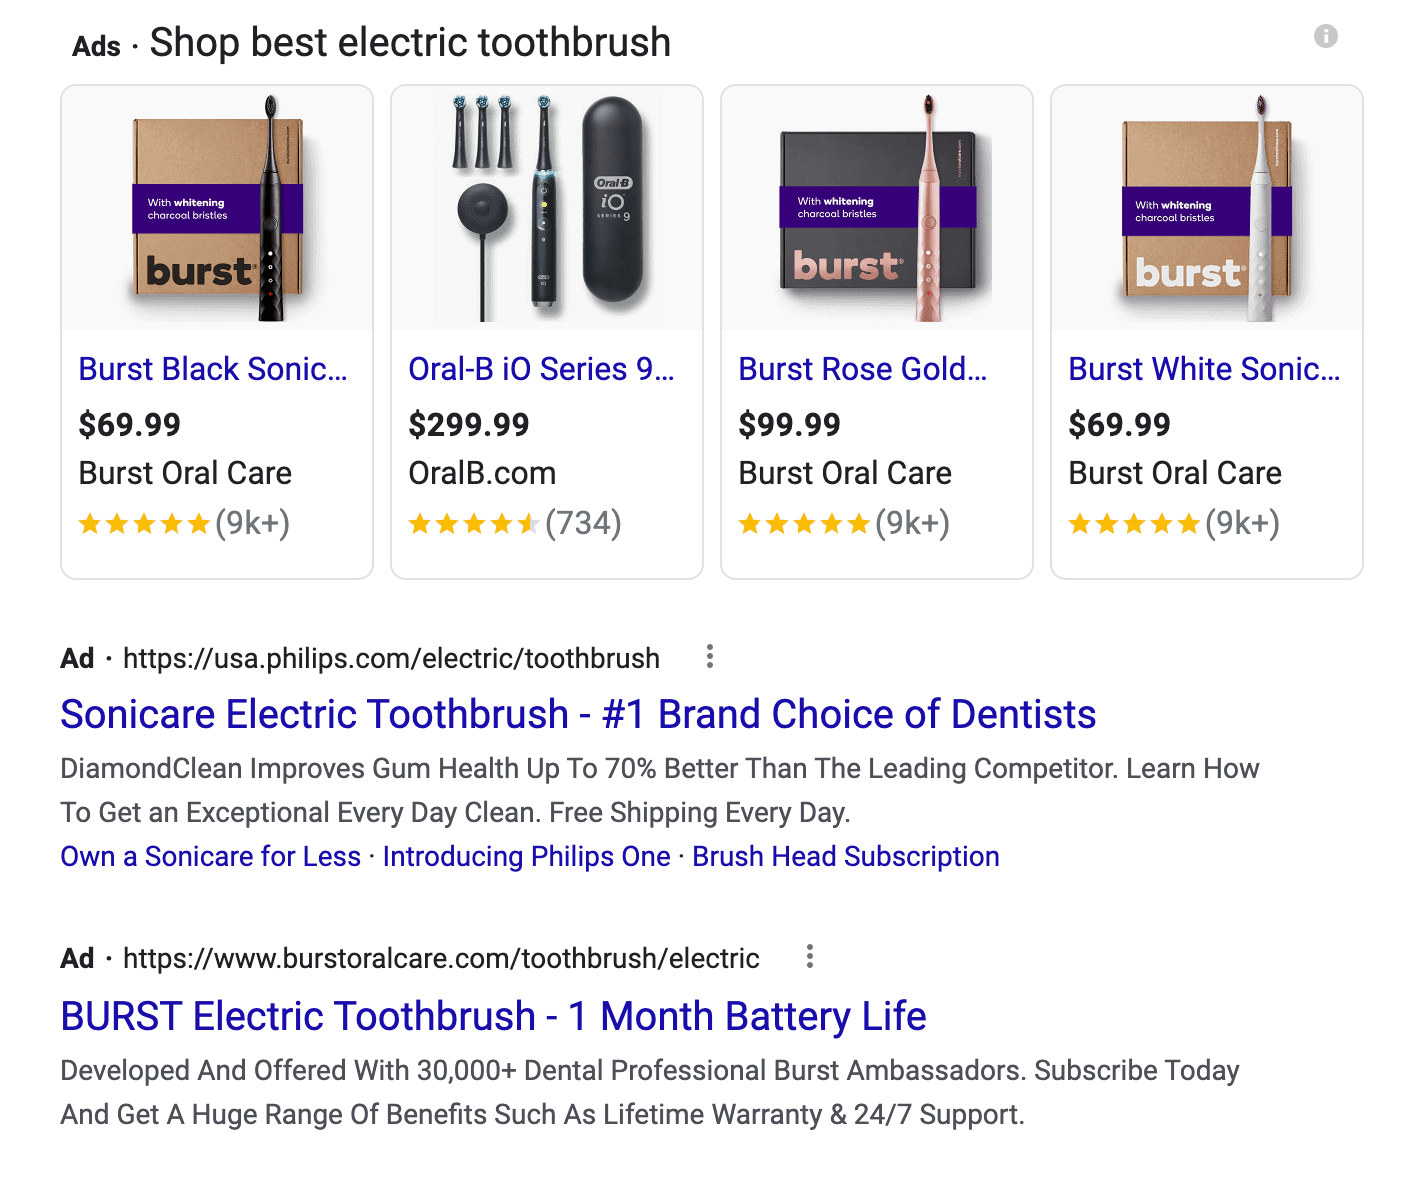 A paid search ad for electric toothbrushes